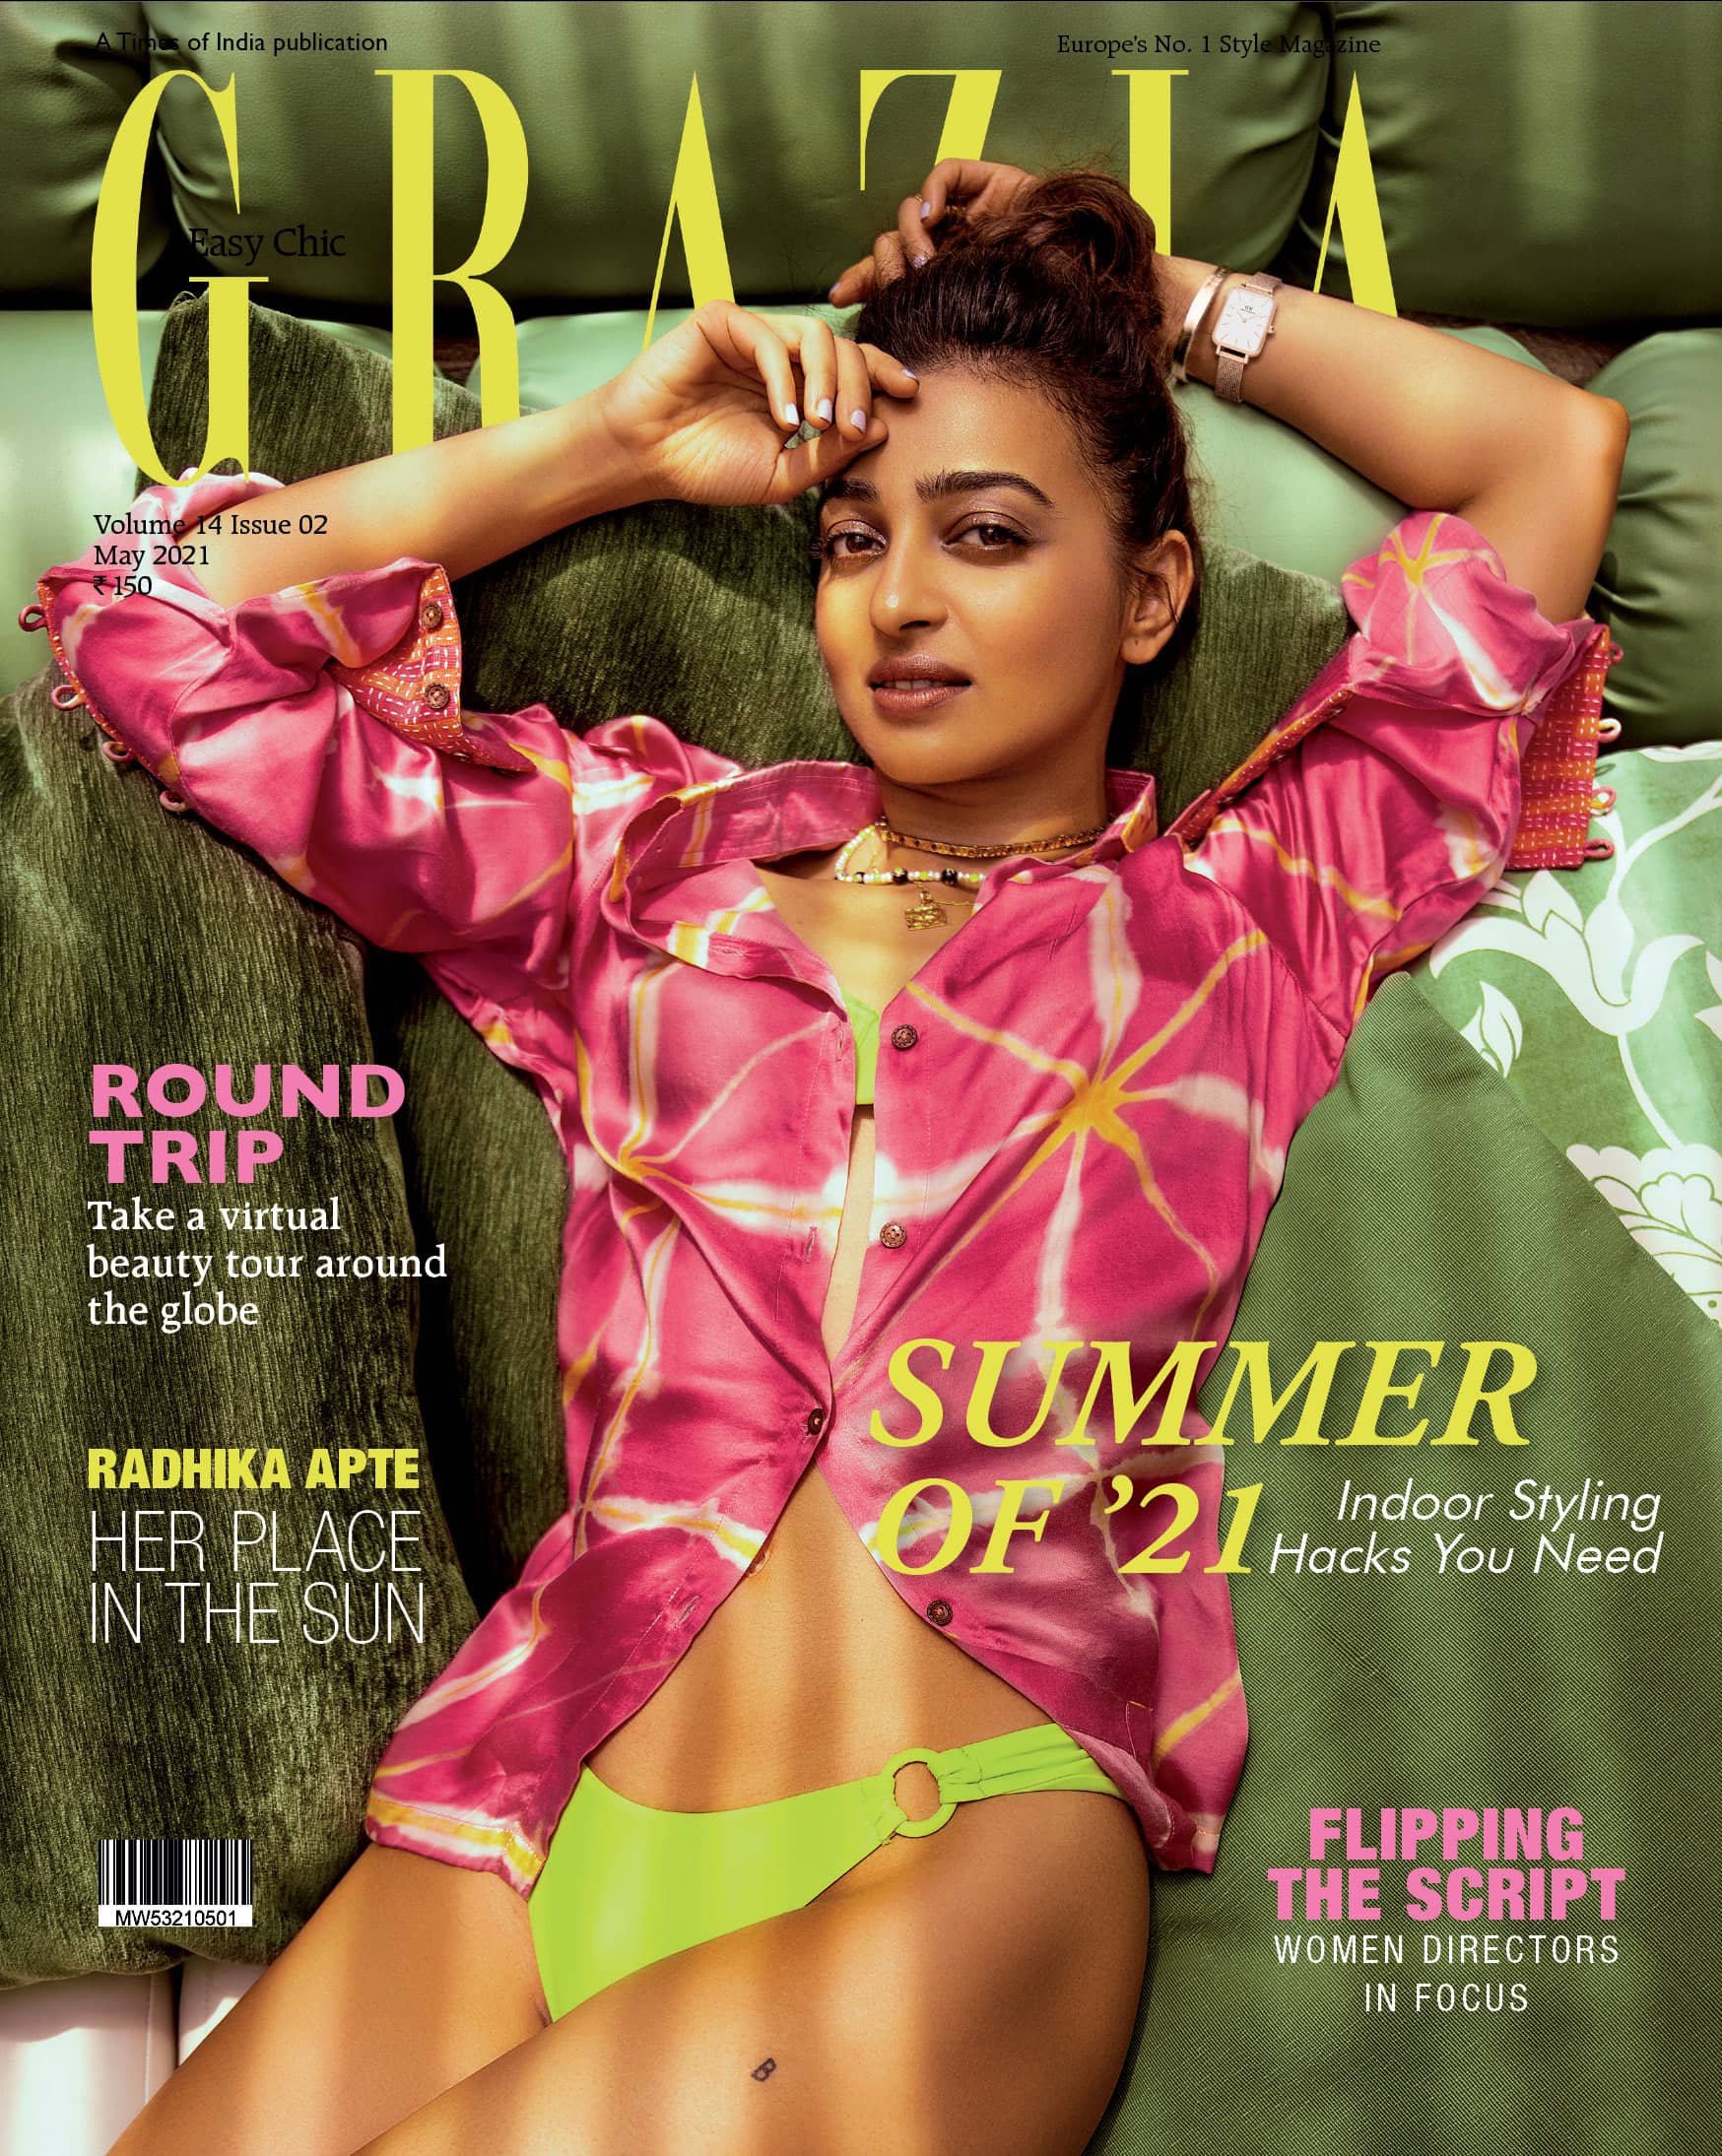 Radhika Apte Wearing Outhouse on Grazia India May 2021 Cover